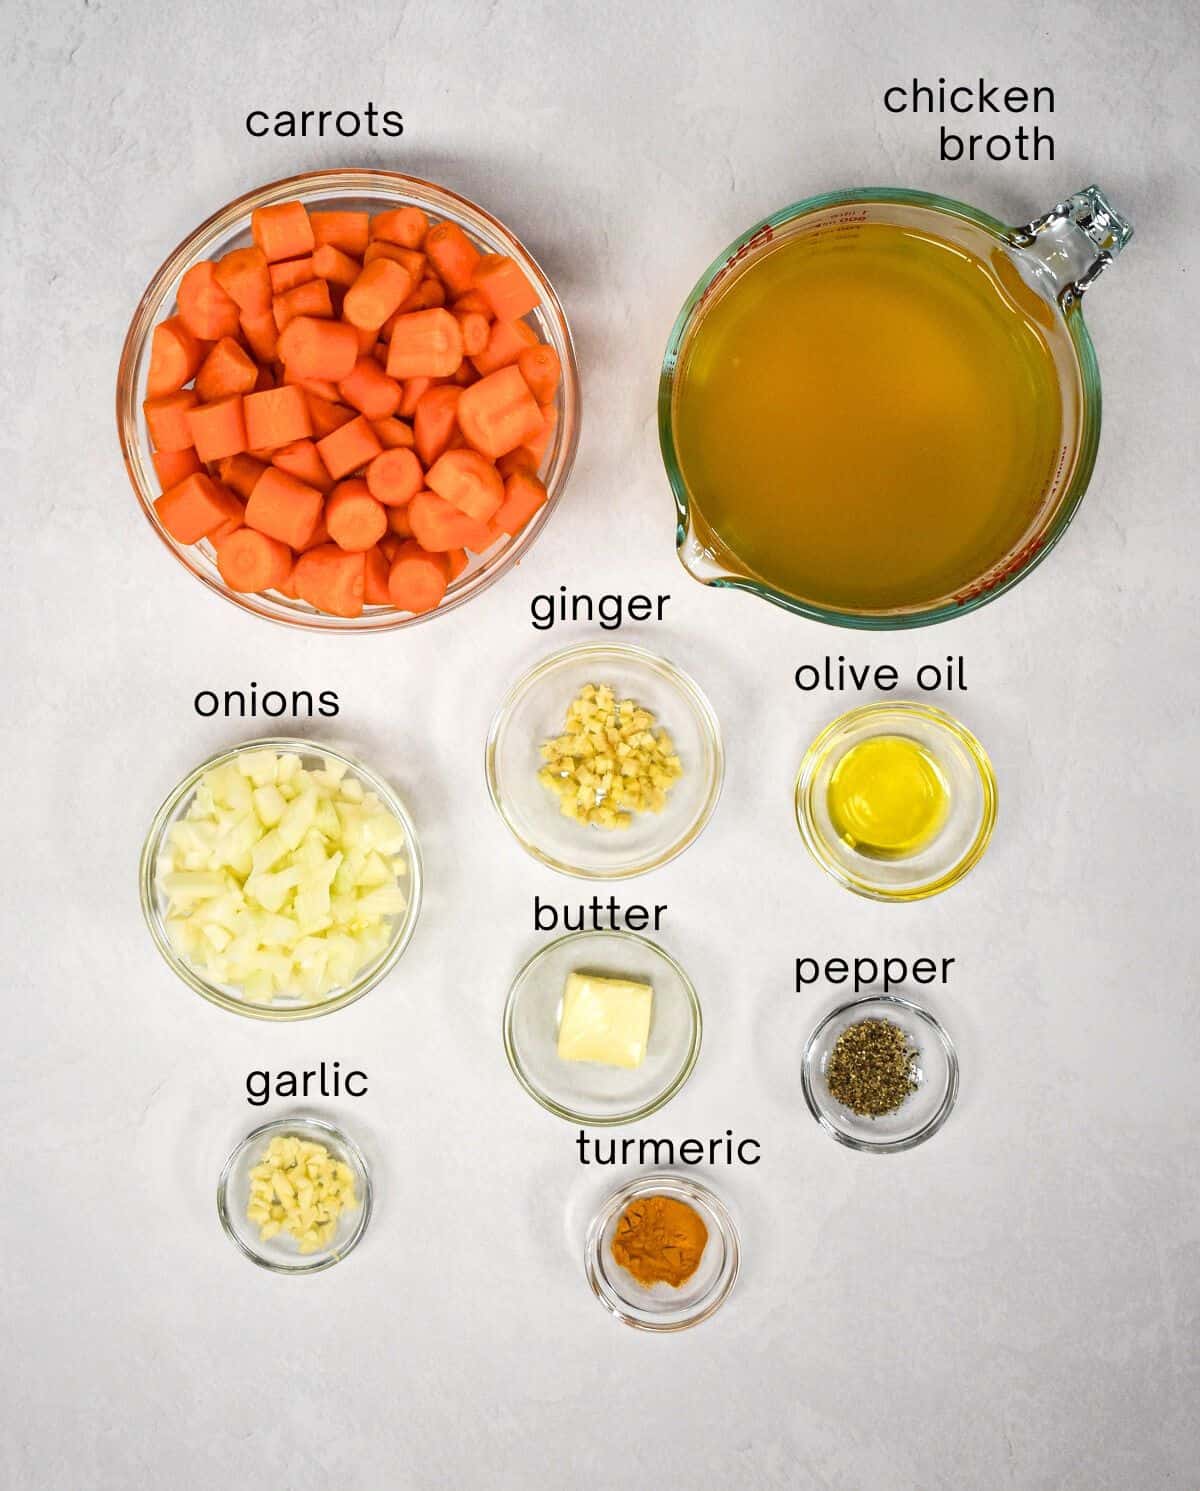 The ingredients for the soup prepped and arranged in glass bowls on a white table. Each ingredient is labeled with small. black letters.